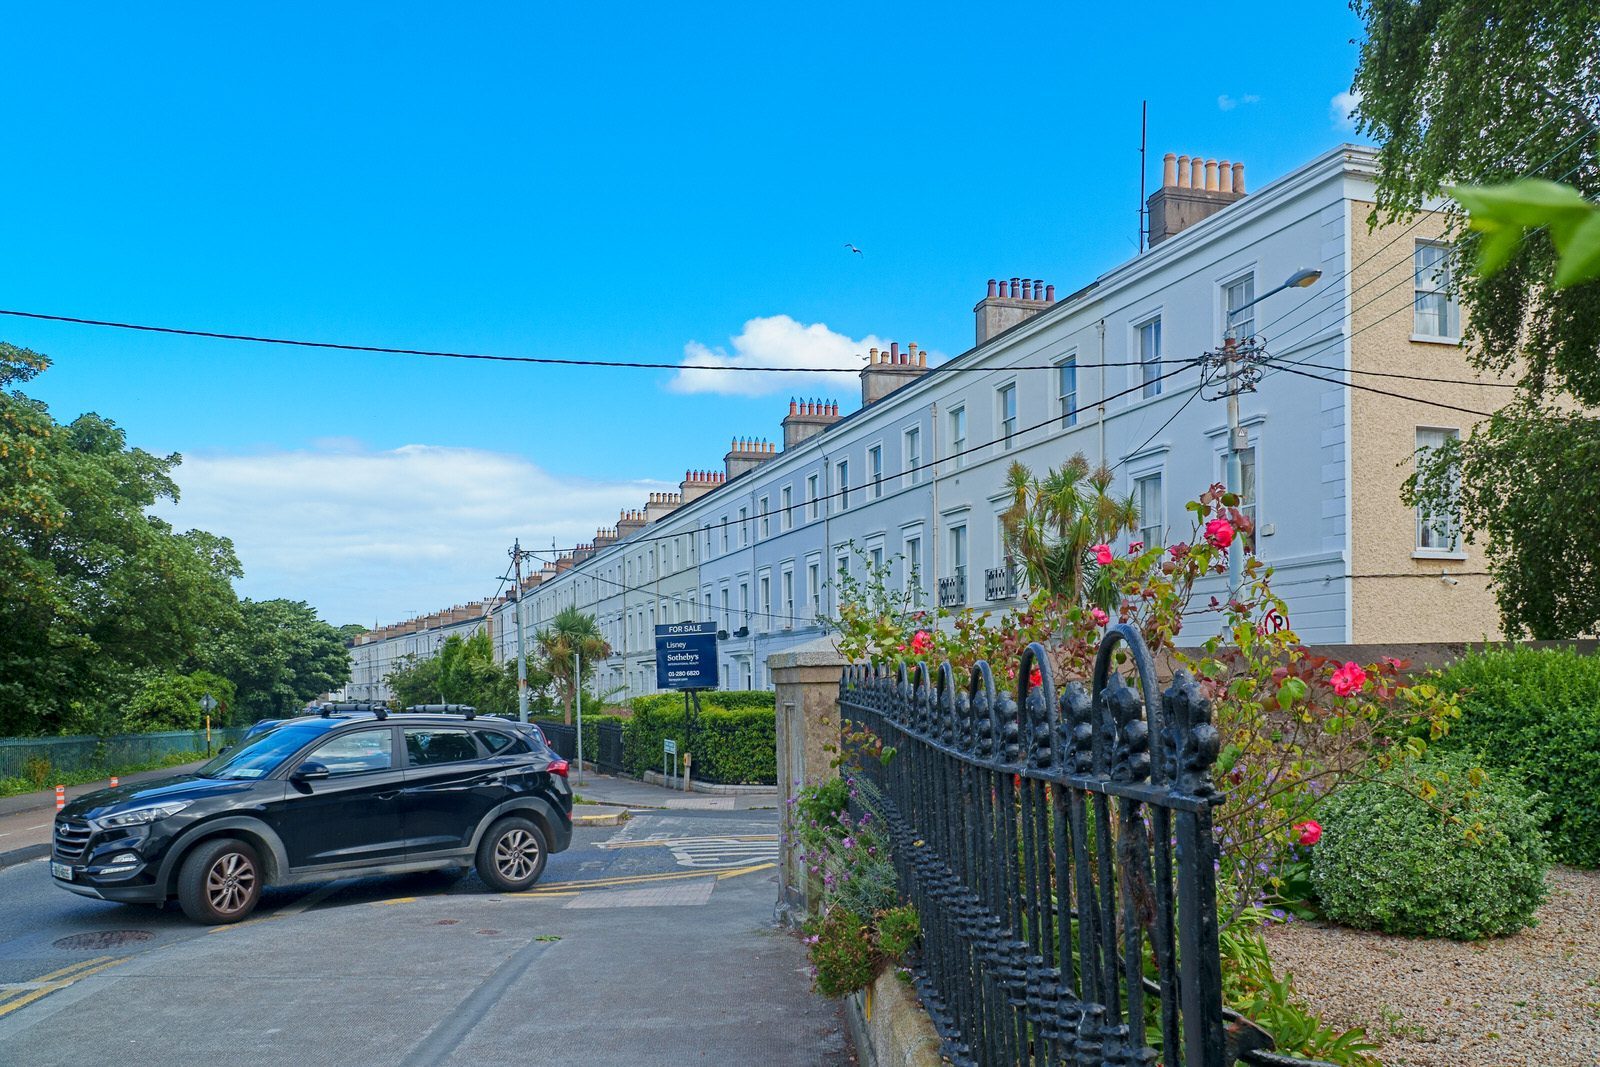 LONGFORD TERRACE AND CLOSE BY [SALTHILL AND MONKSTOWN TRAIN STATION] 001